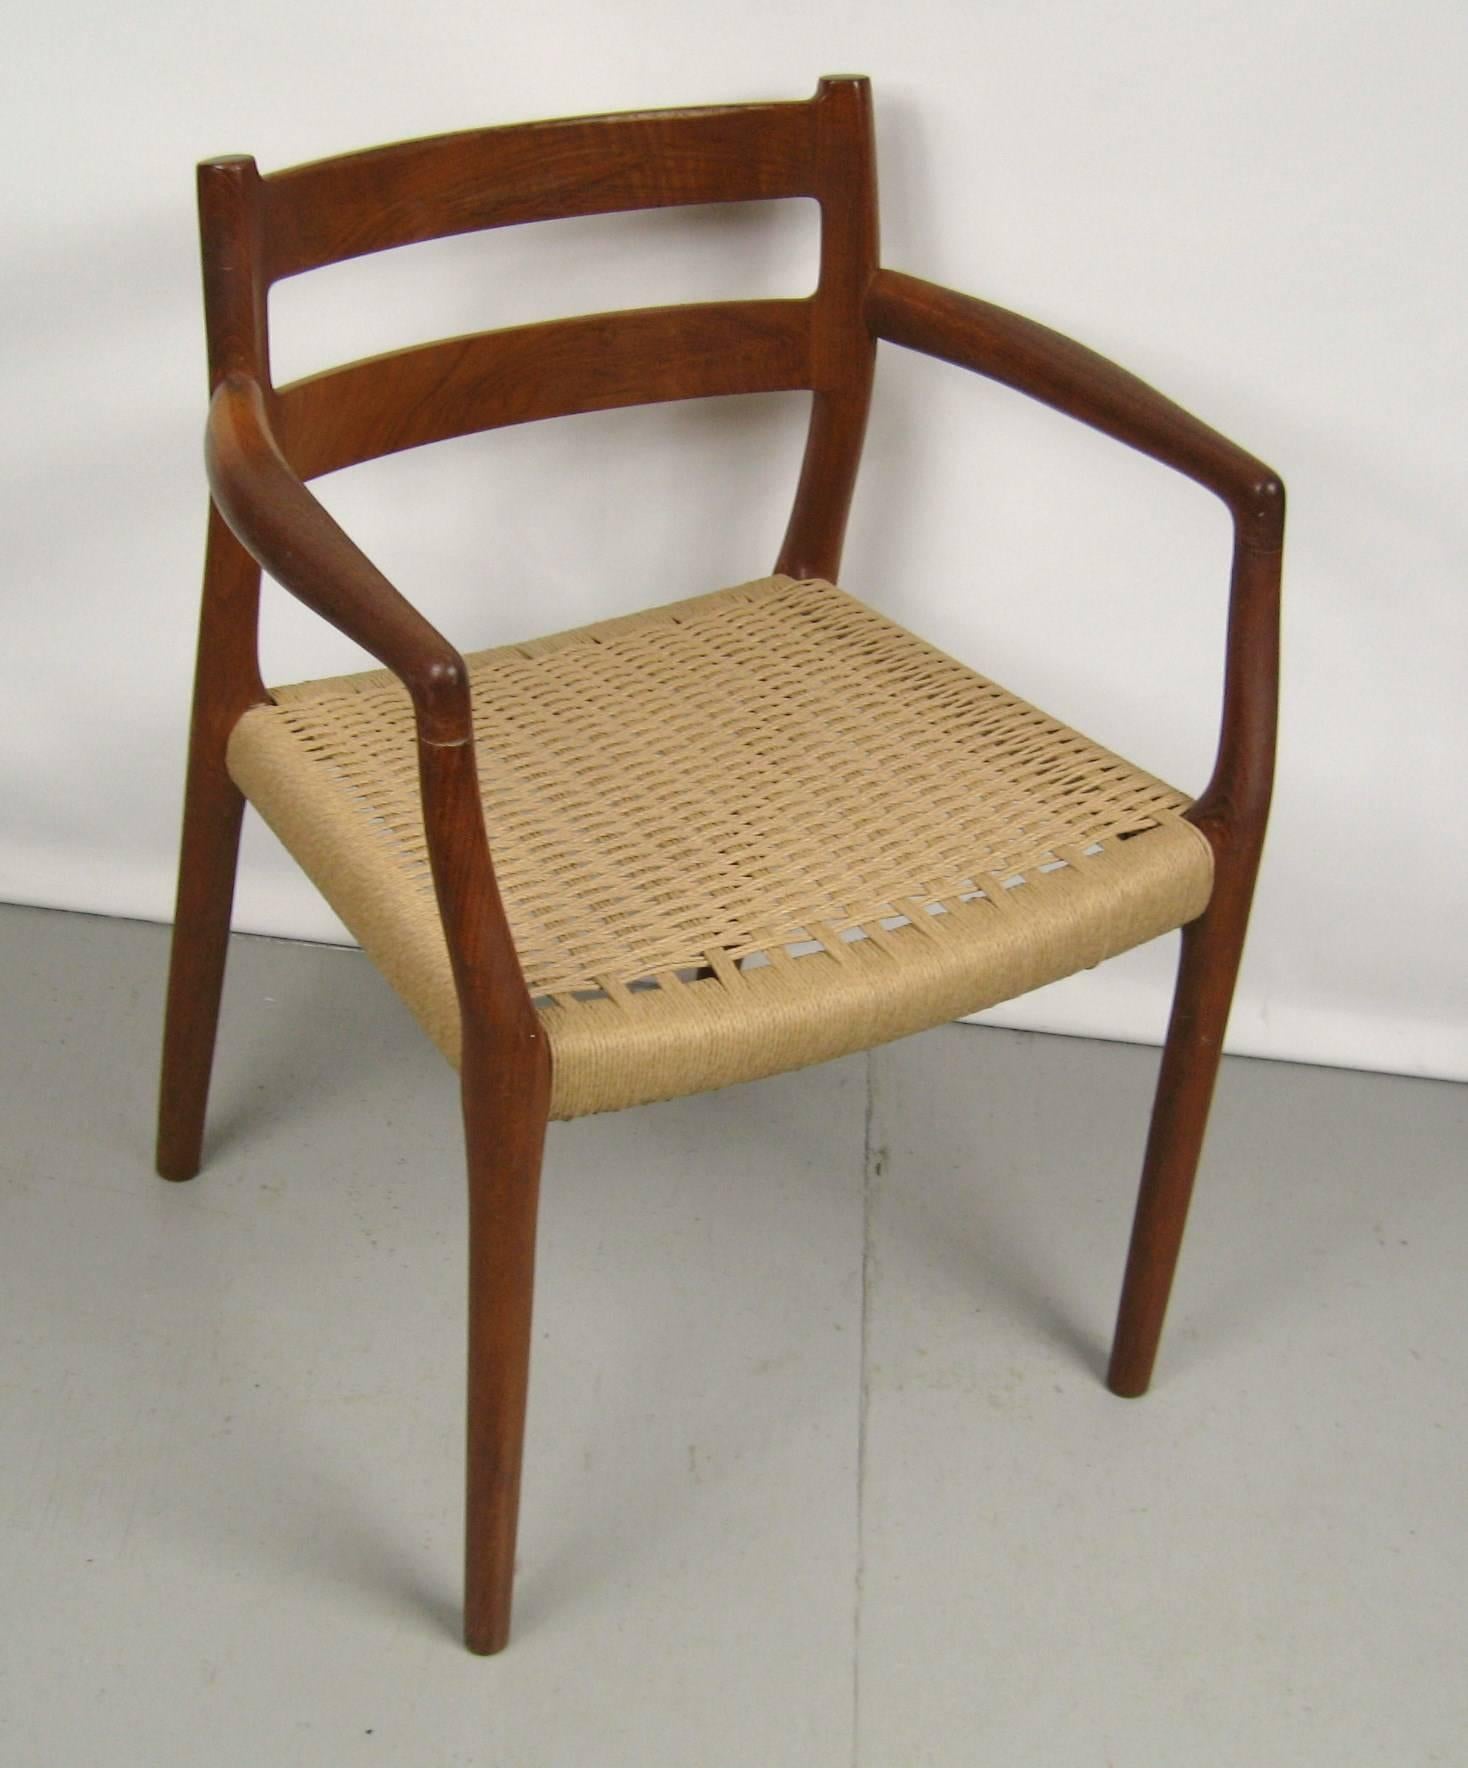 Teak Mid-Century Modern chair by Moller.
Chair and ottoman paper cord seat was just recorded.
Chair measures: 
23 in W x 20 in D x 30 in H
17.5 in up to seat. 
Ottoman:
19.5 in W x 14.75 in D x 17.5 in H. 

Any questions please call or hit